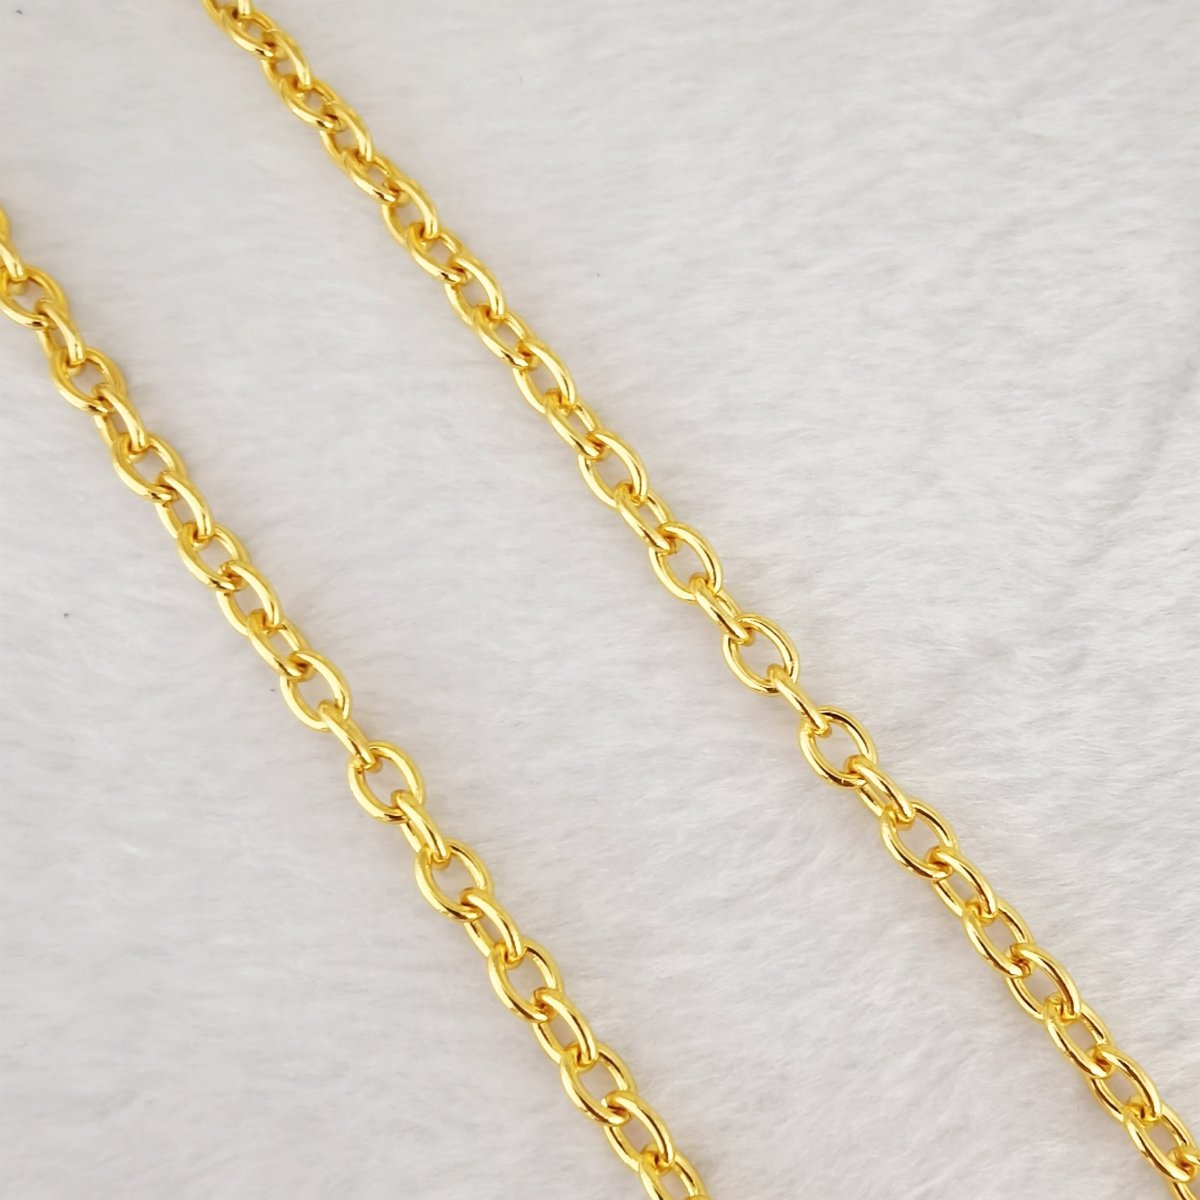 24K Gold, 18K Gold, White Gold Filled CABLE Roll Chain For Jewelry Making, Necklace Bracelet Anklet Supply Component | ROLL-474(XP-002), ROLL-481 (XP-009), ROLL-482 (XP-010) Clearance Pricing - DLUXCA